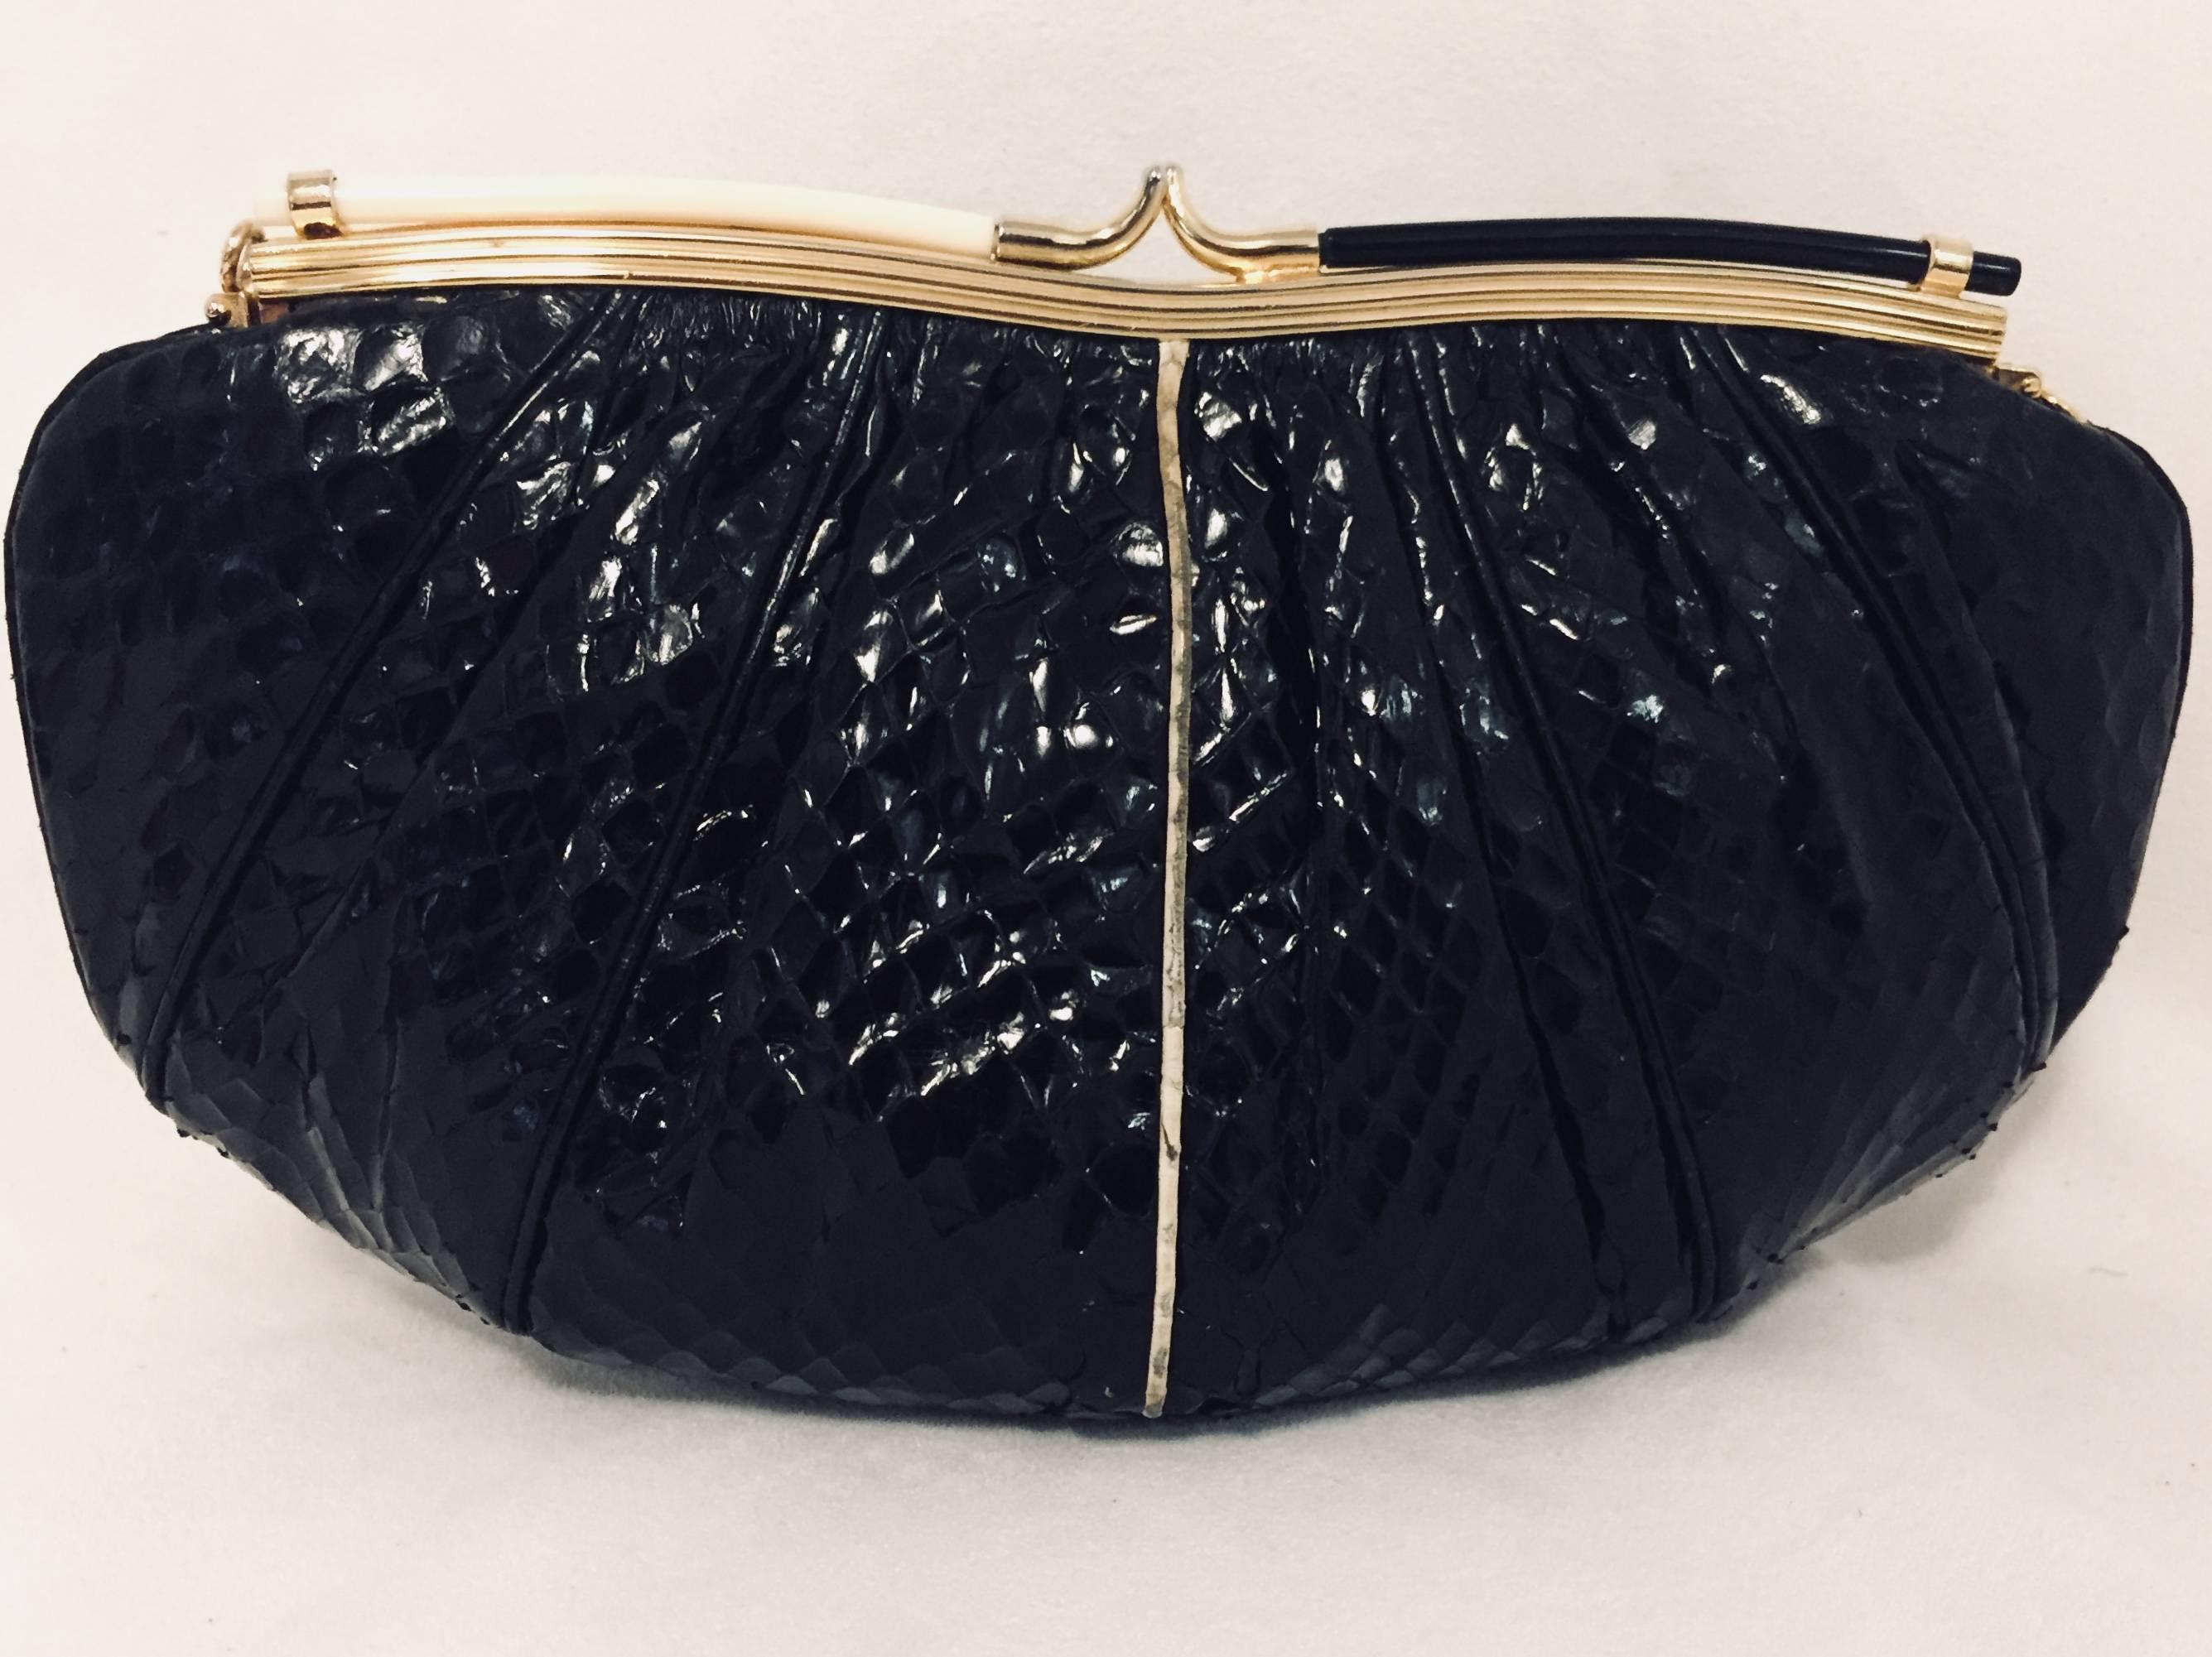 Vintage Black Evening Bag is highly desired by all collectors of Judith Leiber!  Featuring gold tone hardware and slightly gathered, butter-soft python allover, bag easily converts from clutch to shoulder bag using python strap with minimal effort!